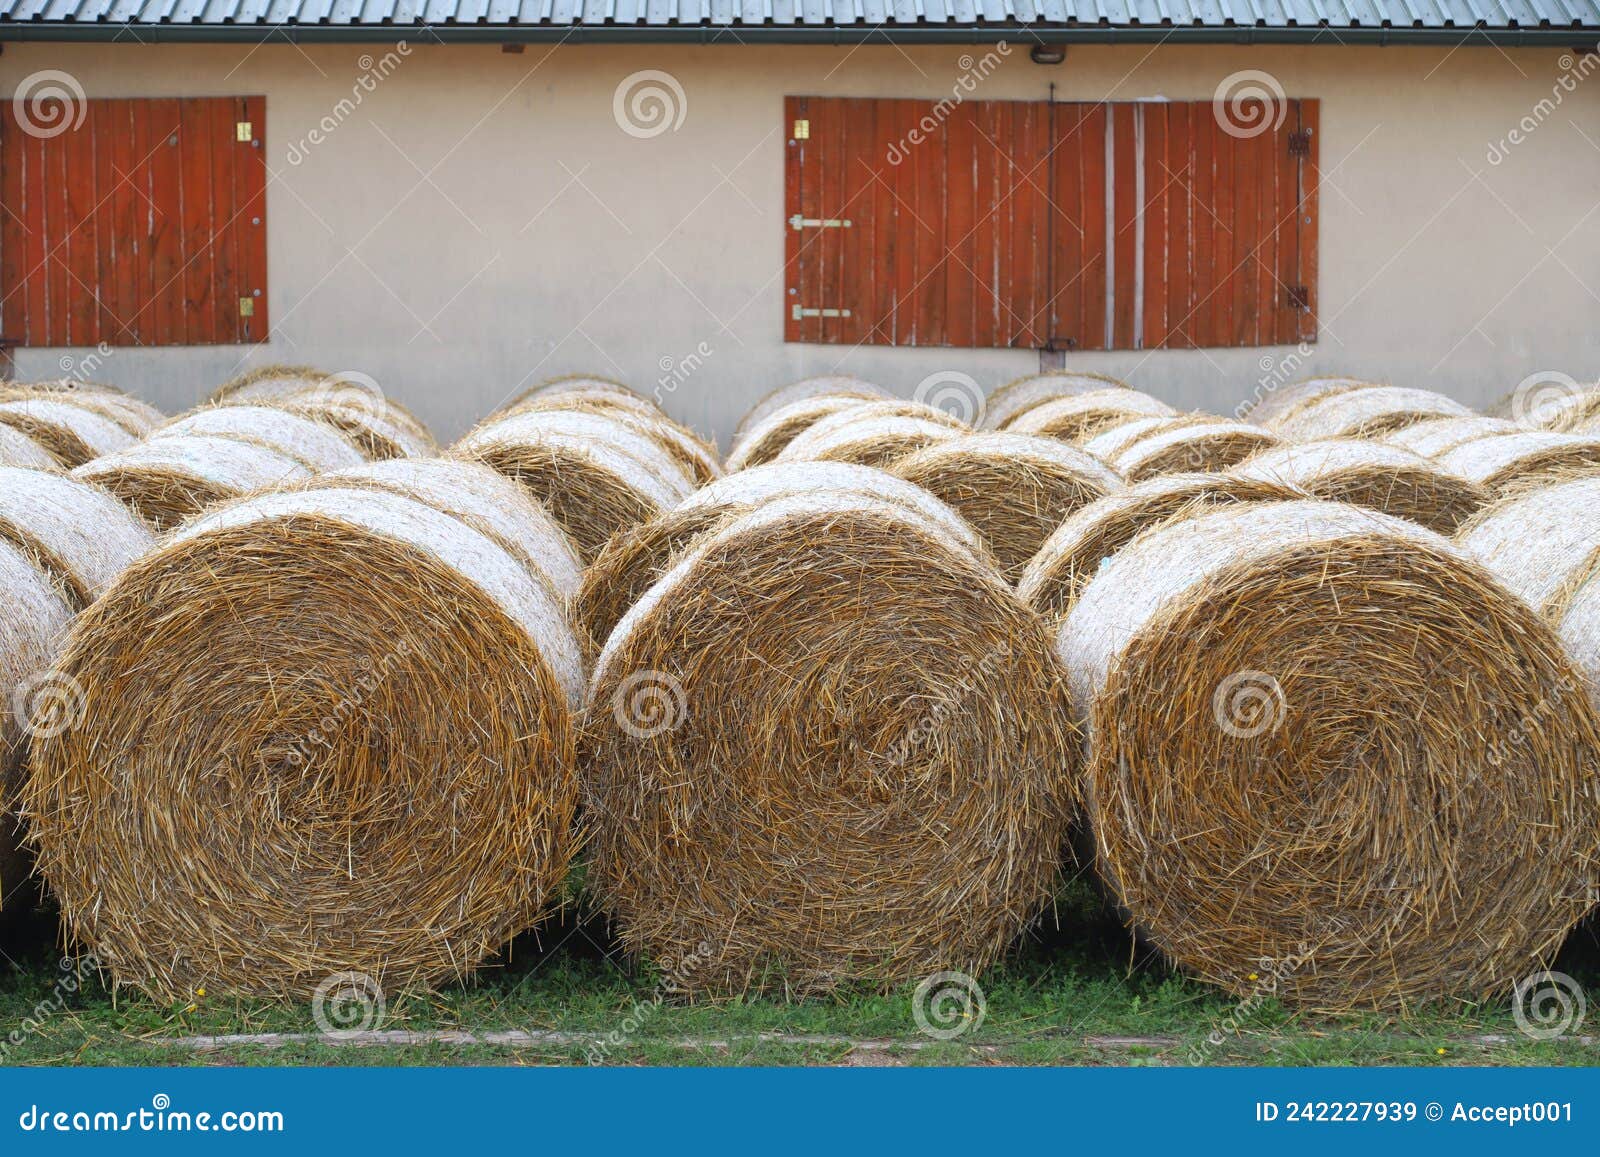 Haystacks for Livestock Feed for Horses Outdoors Stock Image - Image of  farm, domestic: 242227939